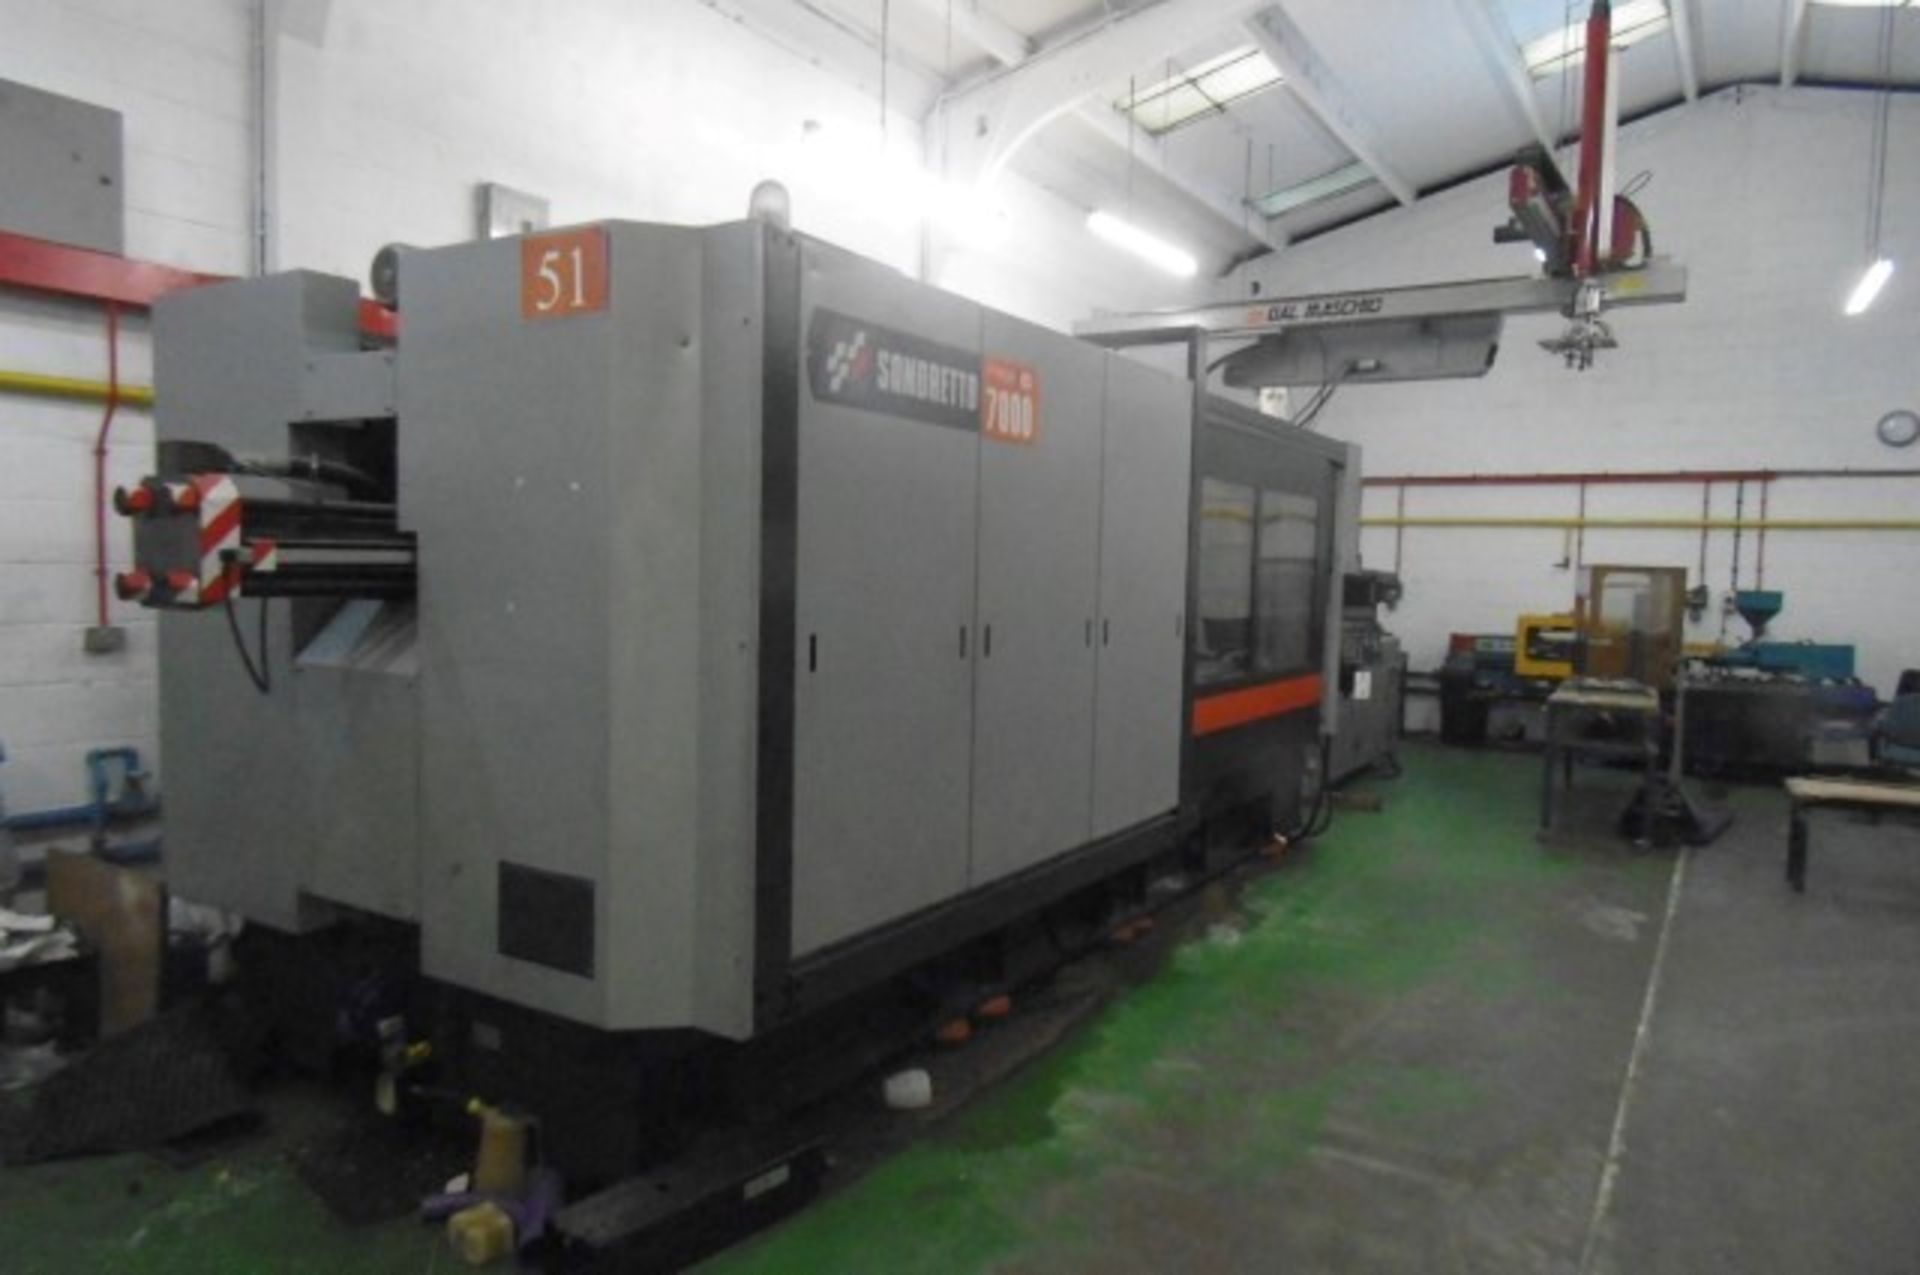 Sandretto 4170/700 Mega TES 7000 plastic injection moulding machine with Dal maschio 3 axis load